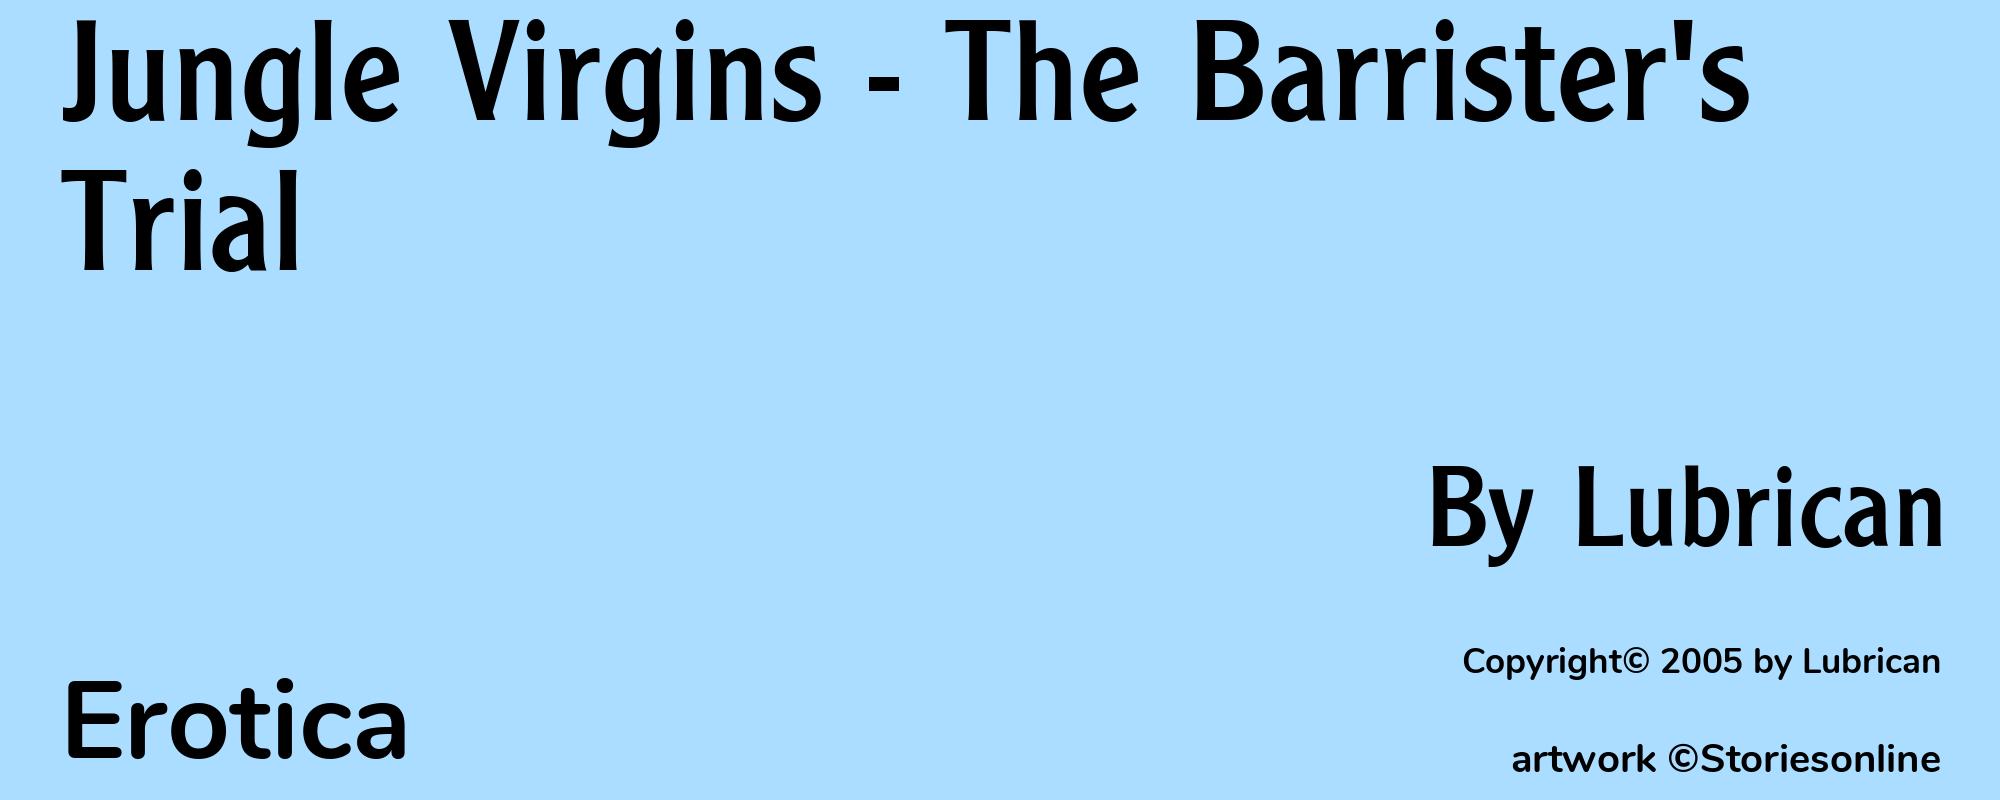 Jungle Virgins - The Barrister's Trial - Cover